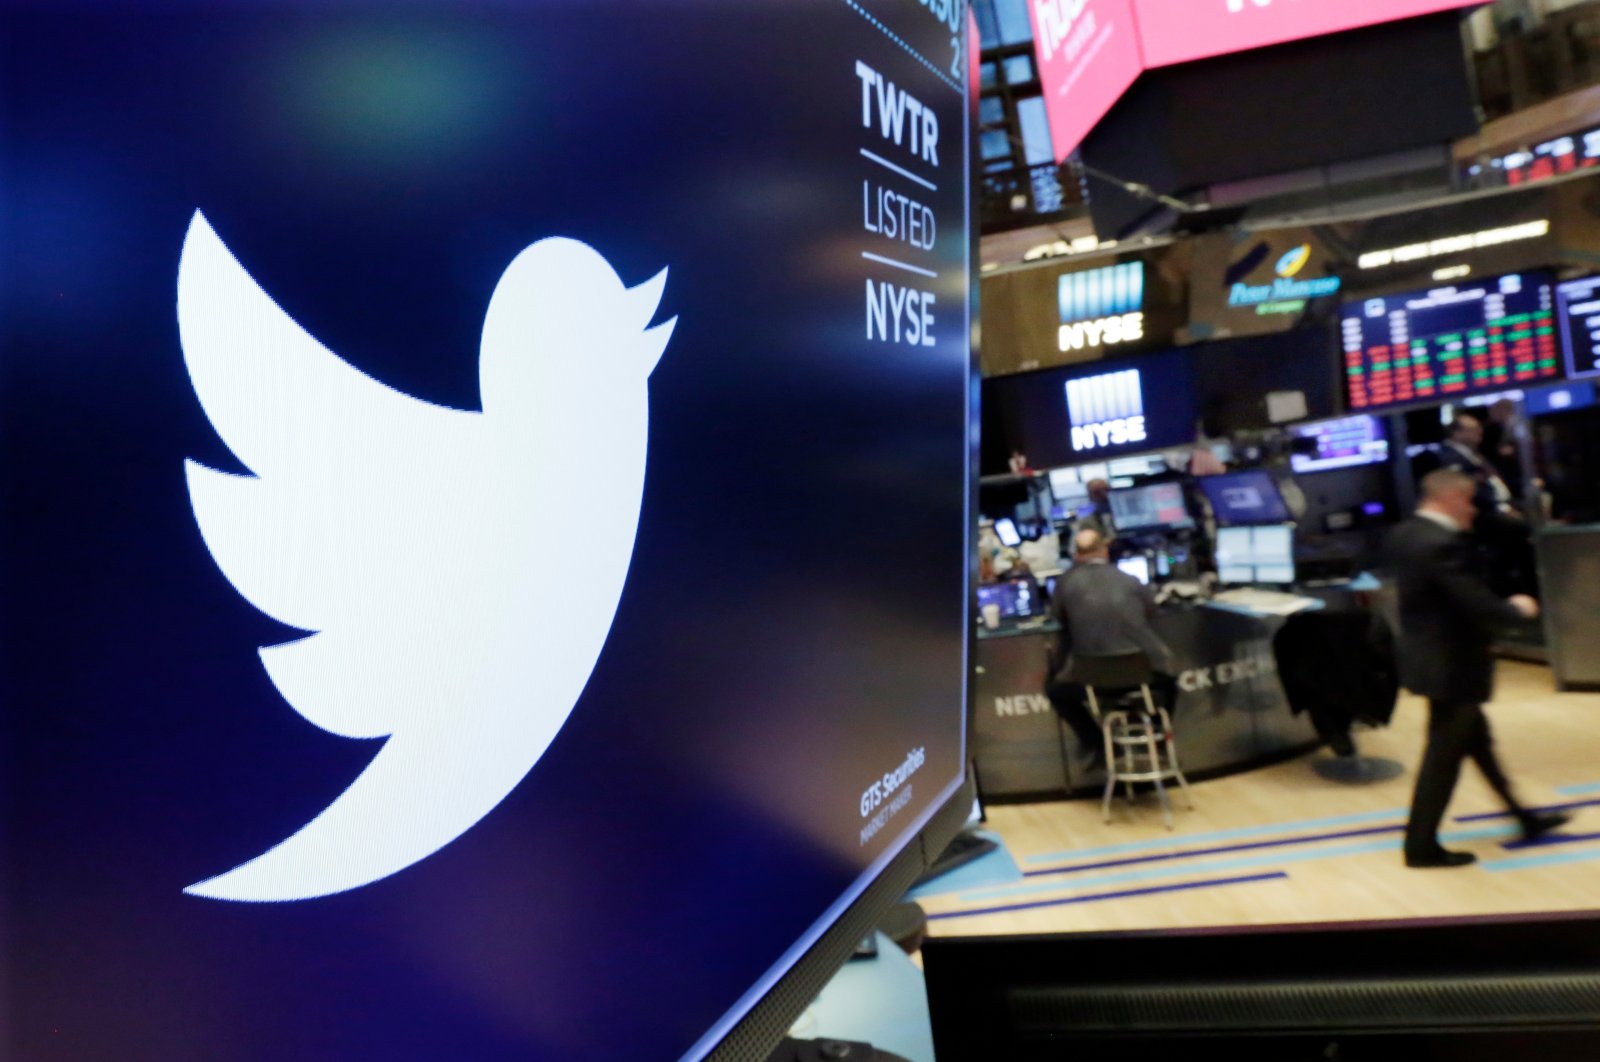 The logo for Twitter is displayed above a trading post on the floor of the New York Stock Exchange, Feb. 8, 2018. (AP Photo)